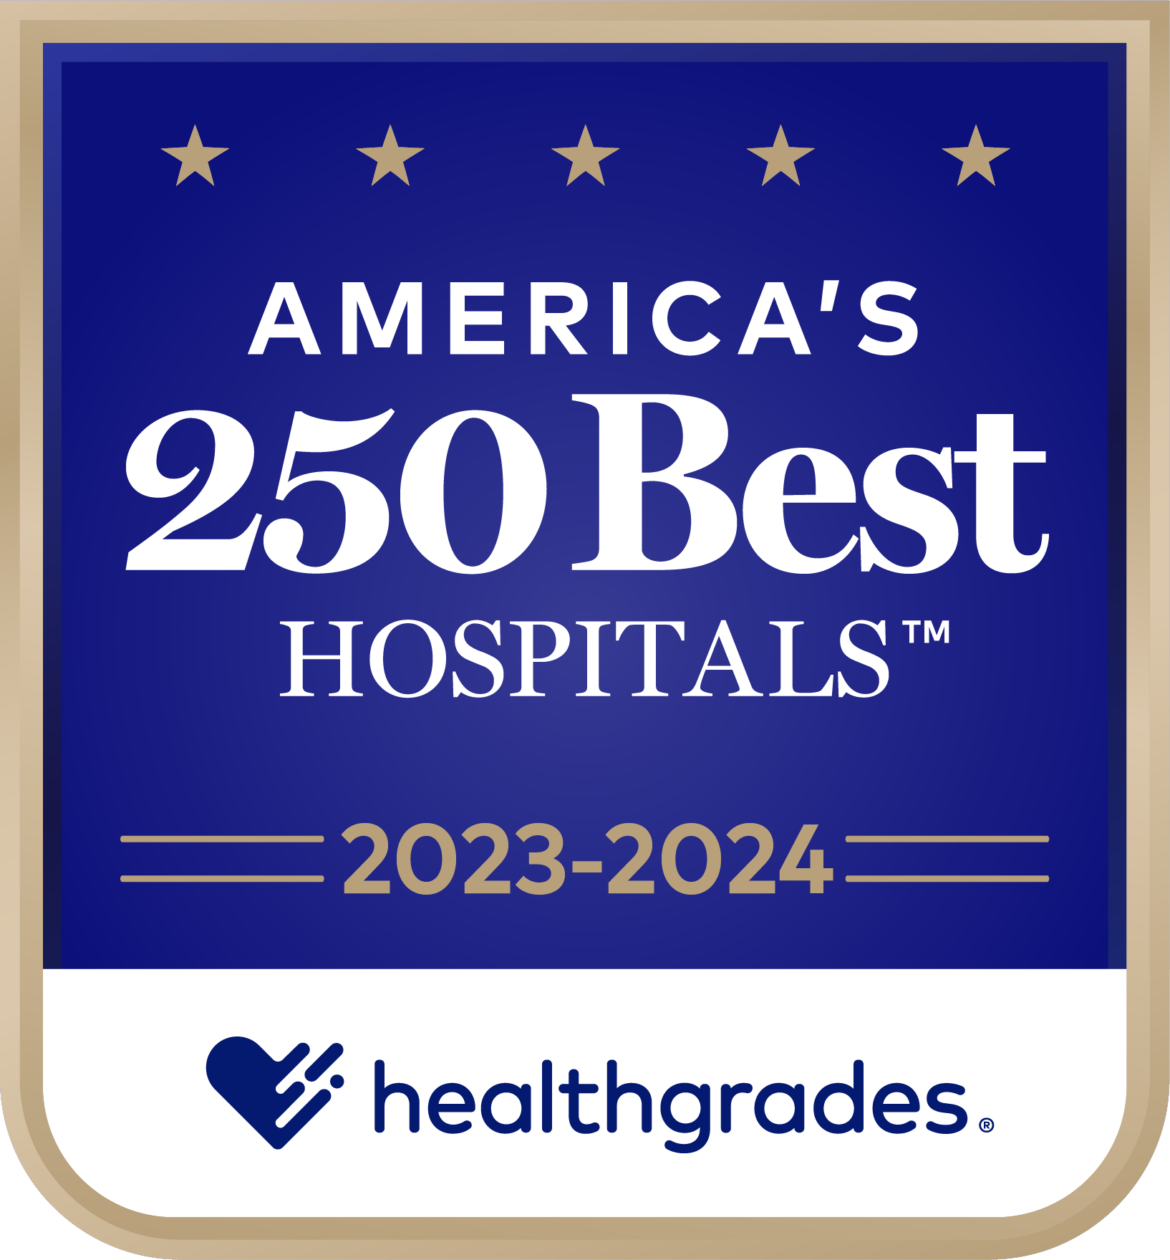 Franciscan Health Indianapolis named one of America’s 250 Best Hospitals by Healthgrades